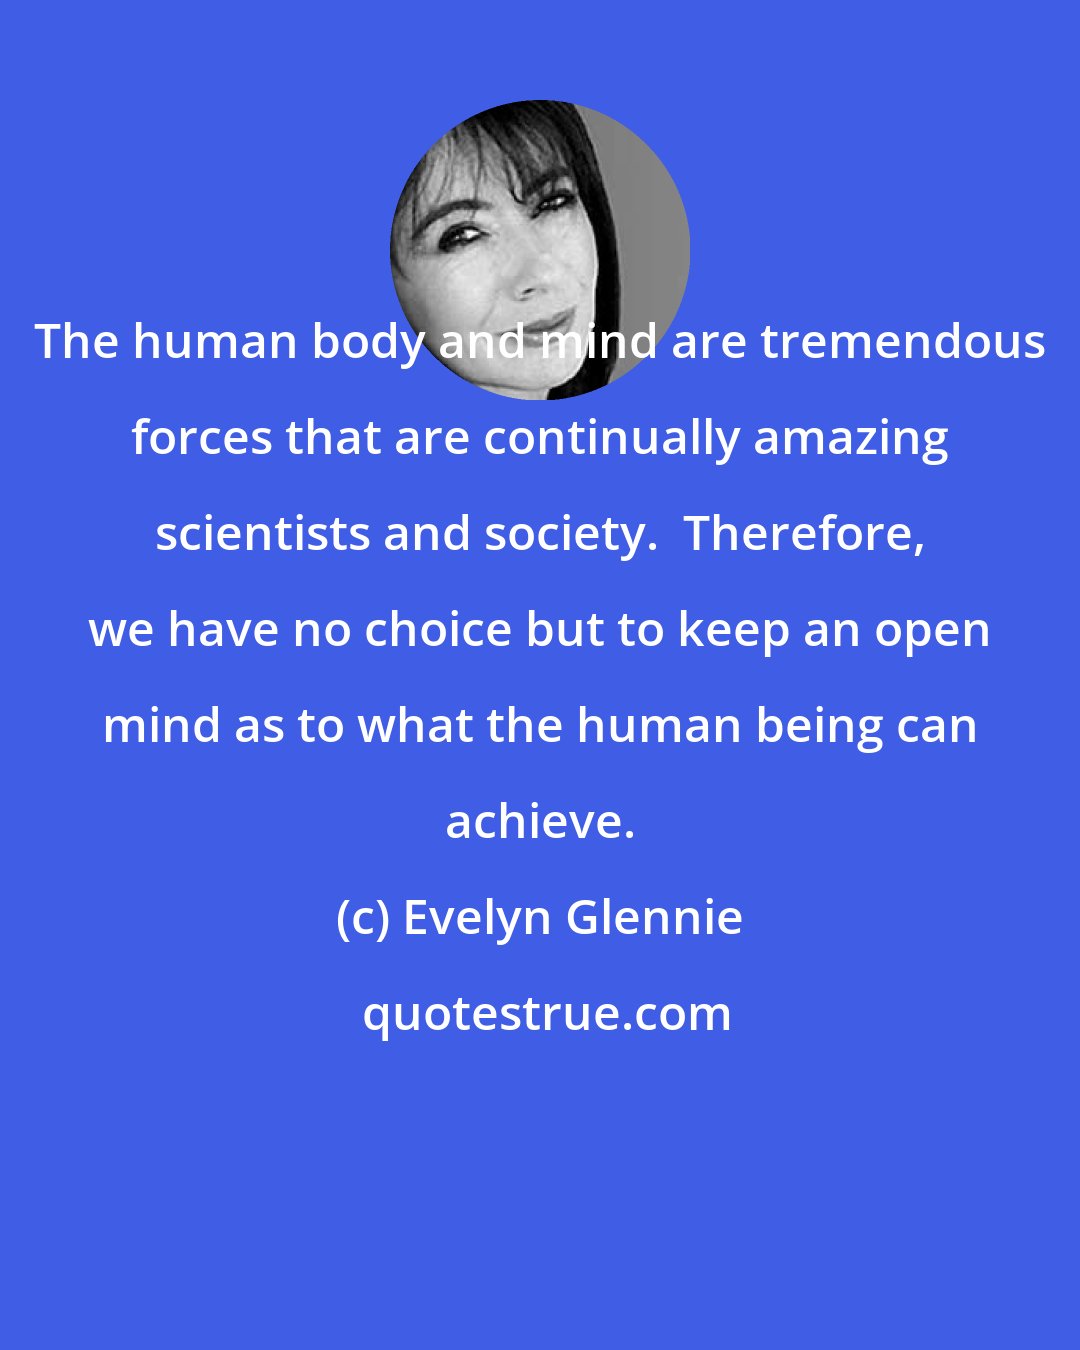 Evelyn Glennie: The human body and mind are tremendous forces that are continually amazing scientists and society.  Therefore, we have no choice but to keep an open mind as to what the human being can achieve.